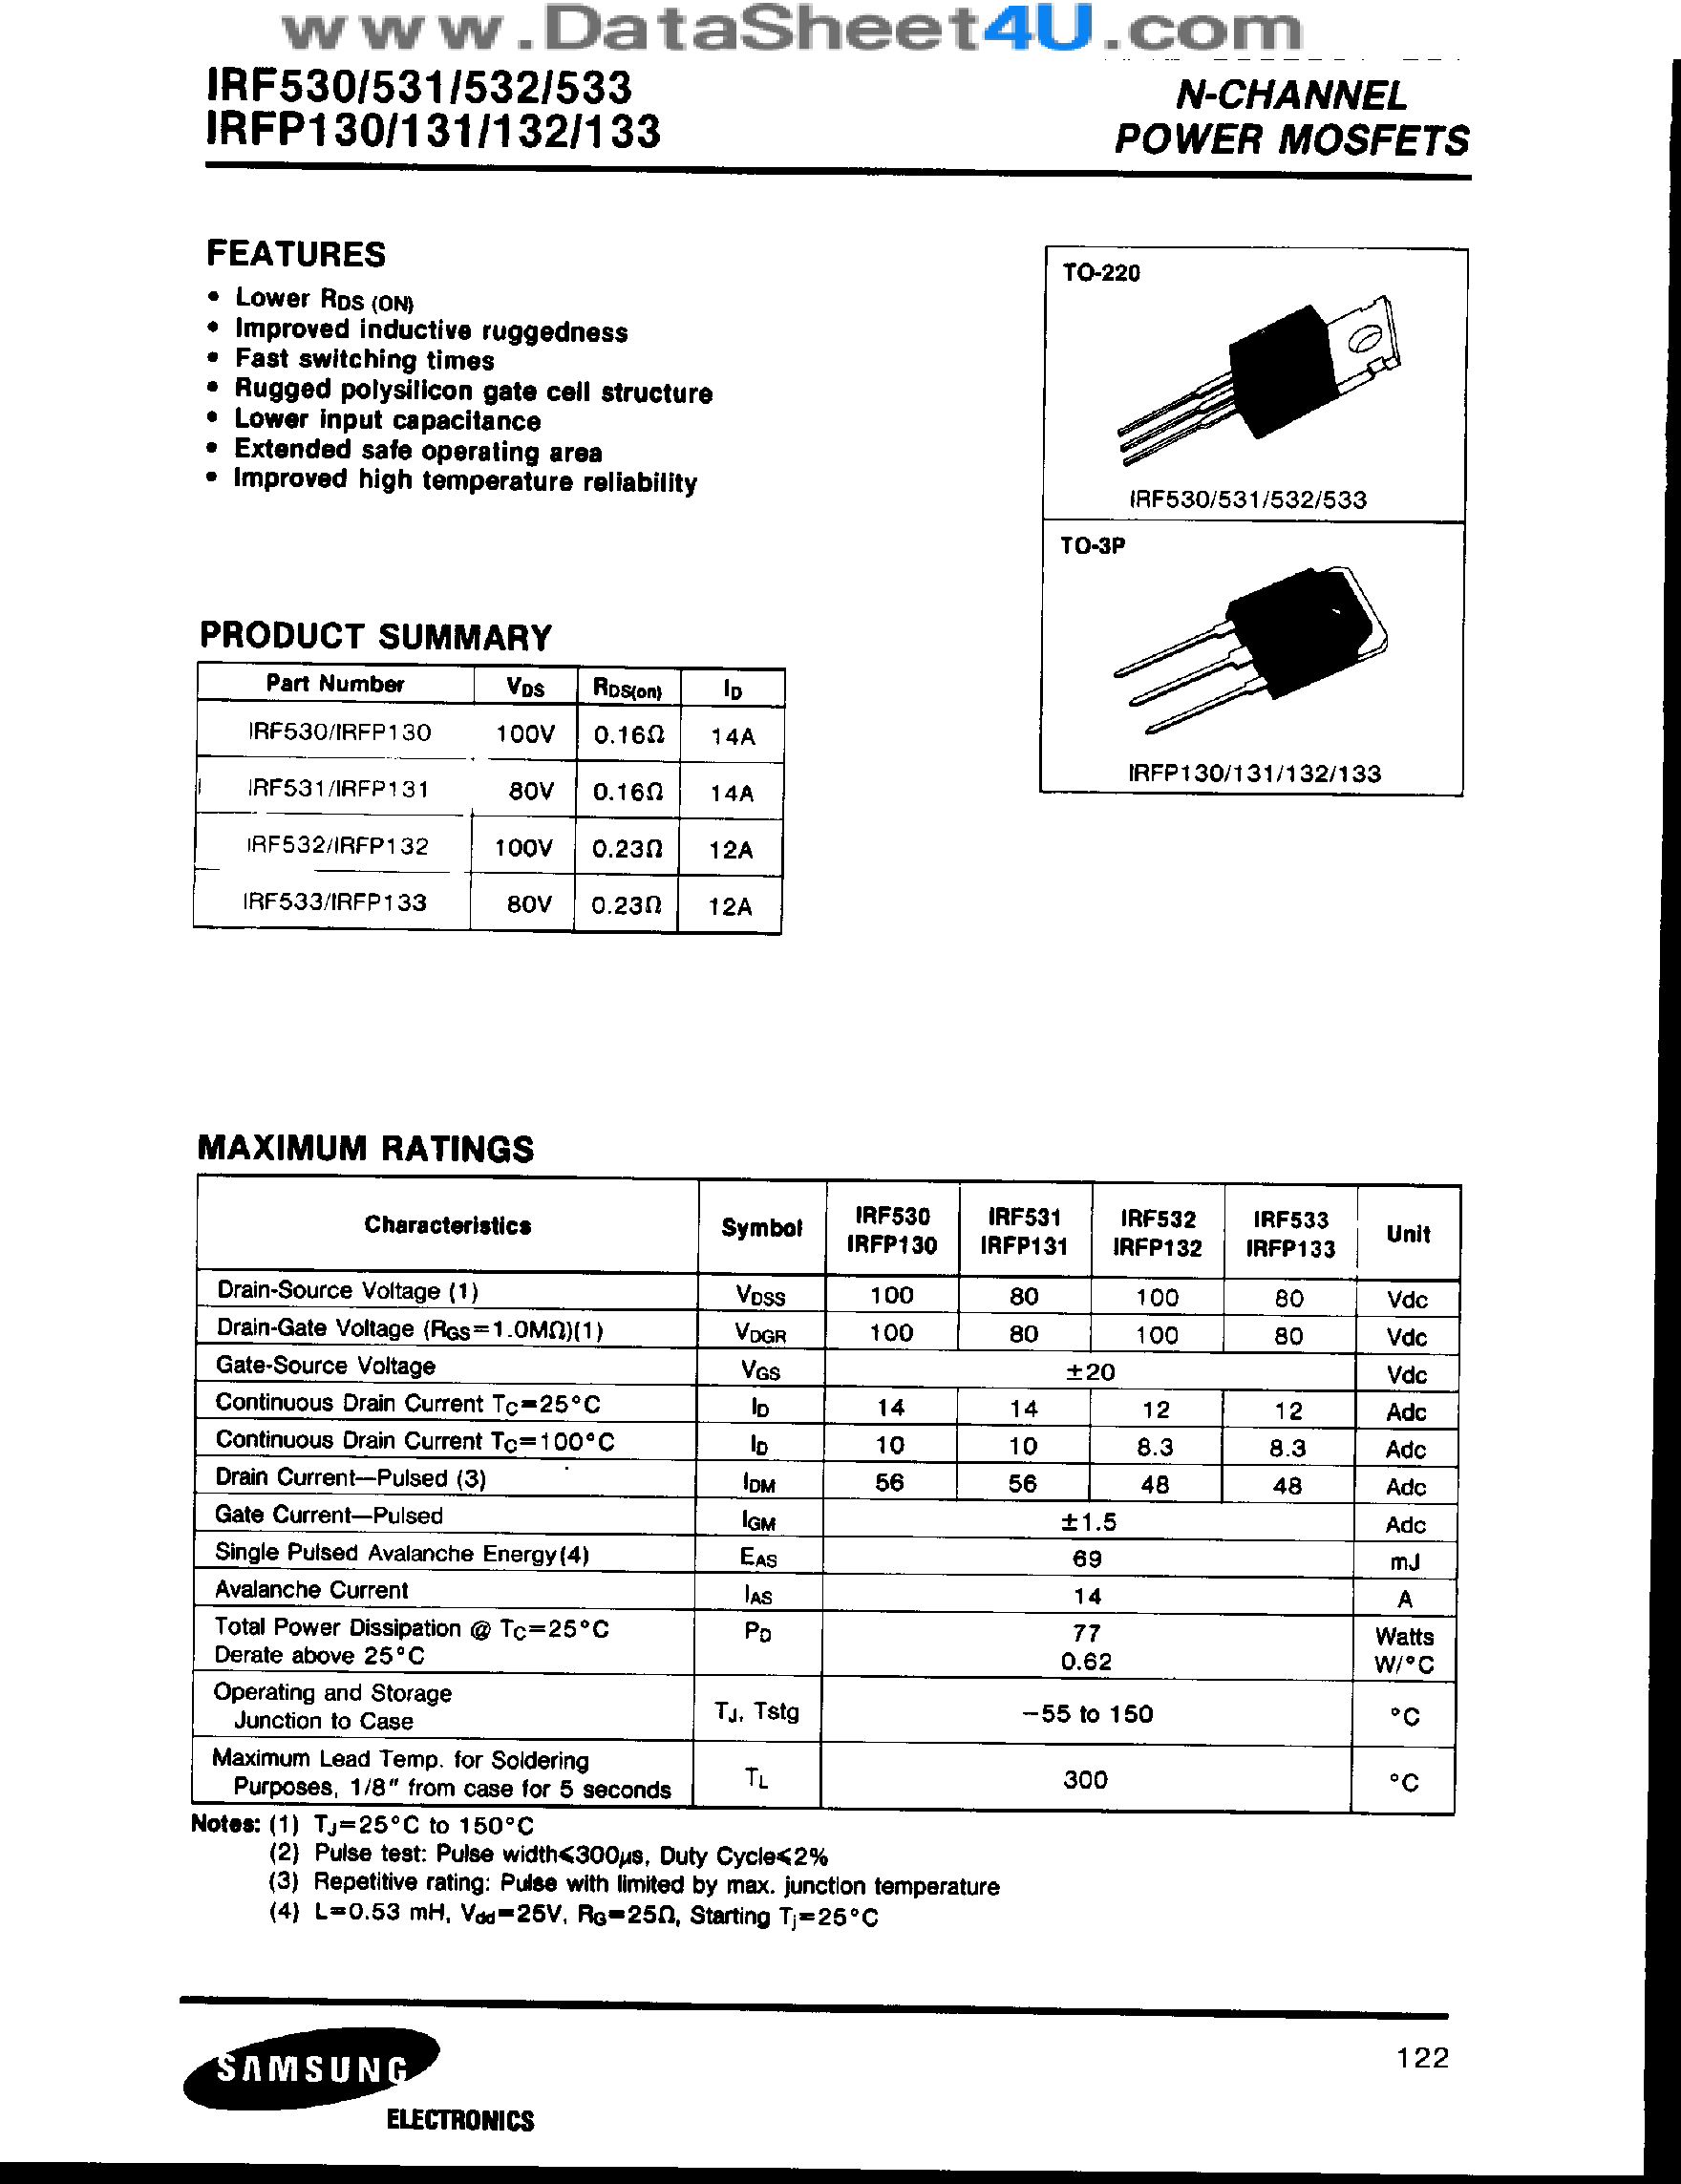 Datasheet IRF530 - (IRF530 - IRF533) N-CHANNEL POWER MOSFETS page 1